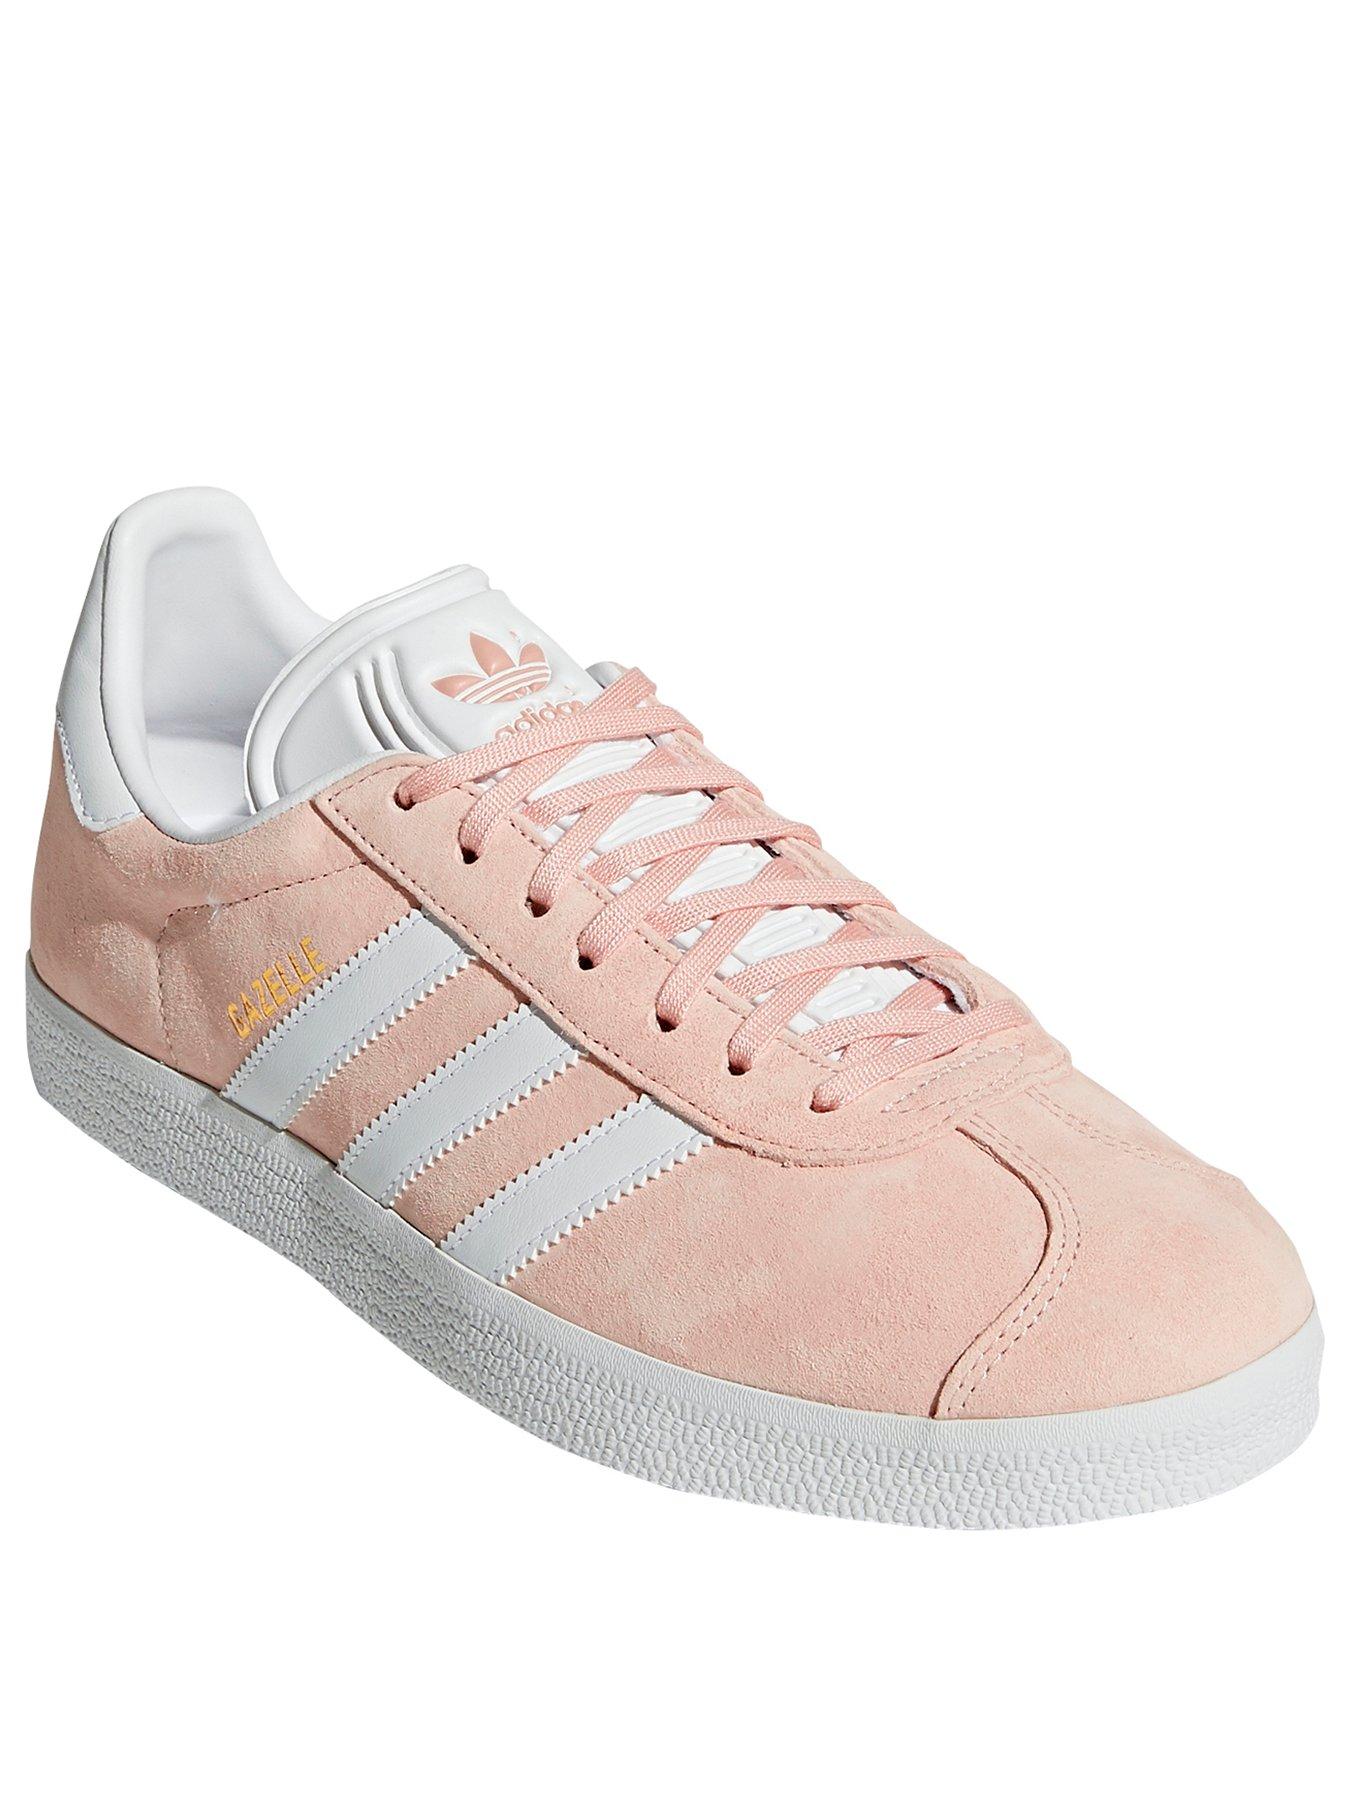 adidas pink mens trainers